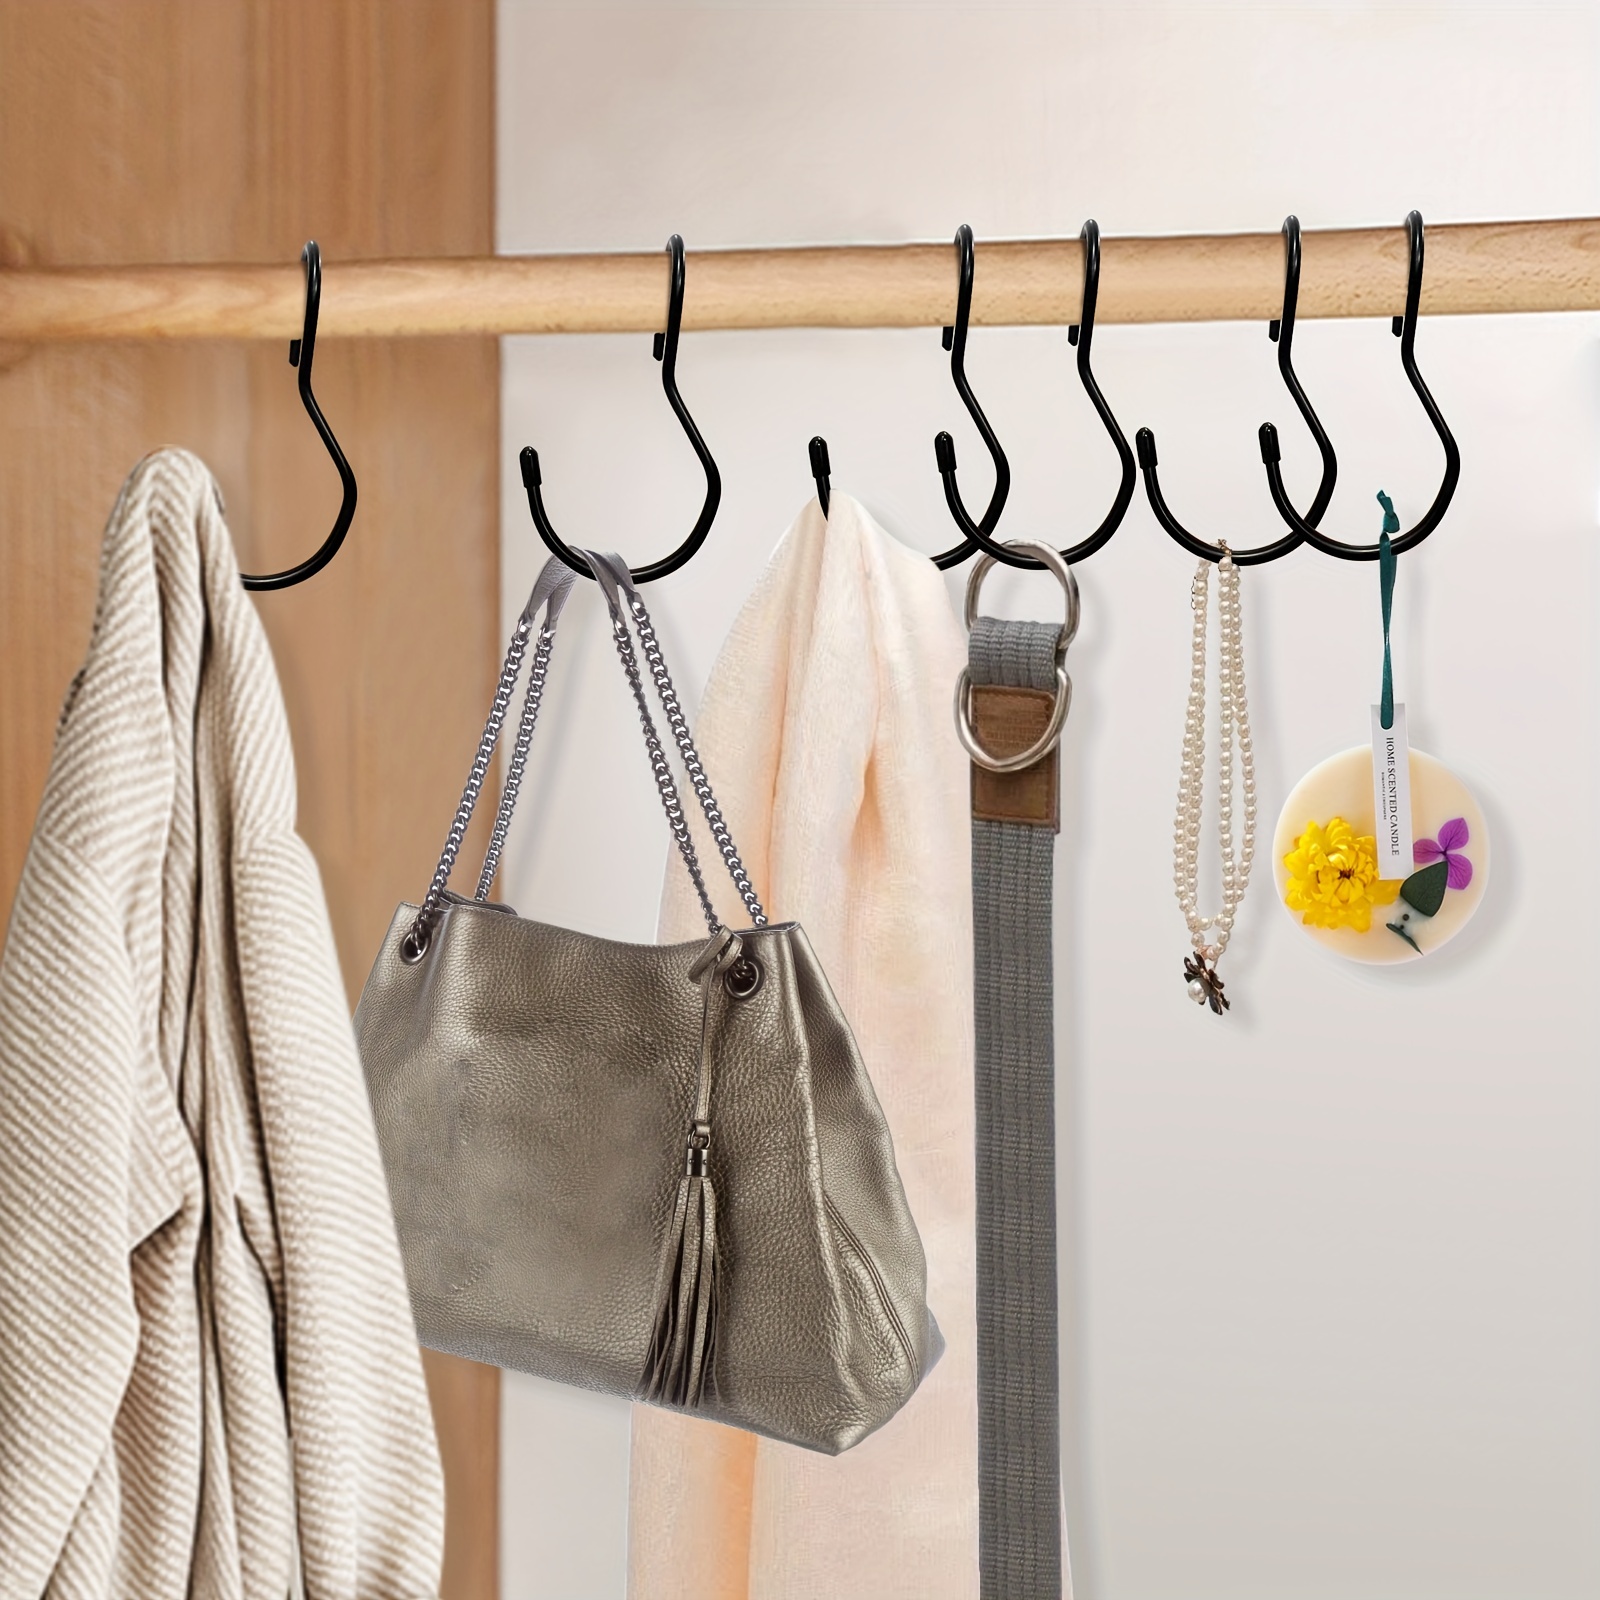 6/12pcs Heavy Duty Black Metal S Hooks for Hanging Purse, Bags, Belts,  Scarves, Hats, Clothes, Pots and Pans - Strong and Durable, Wall Decor  Aestheti